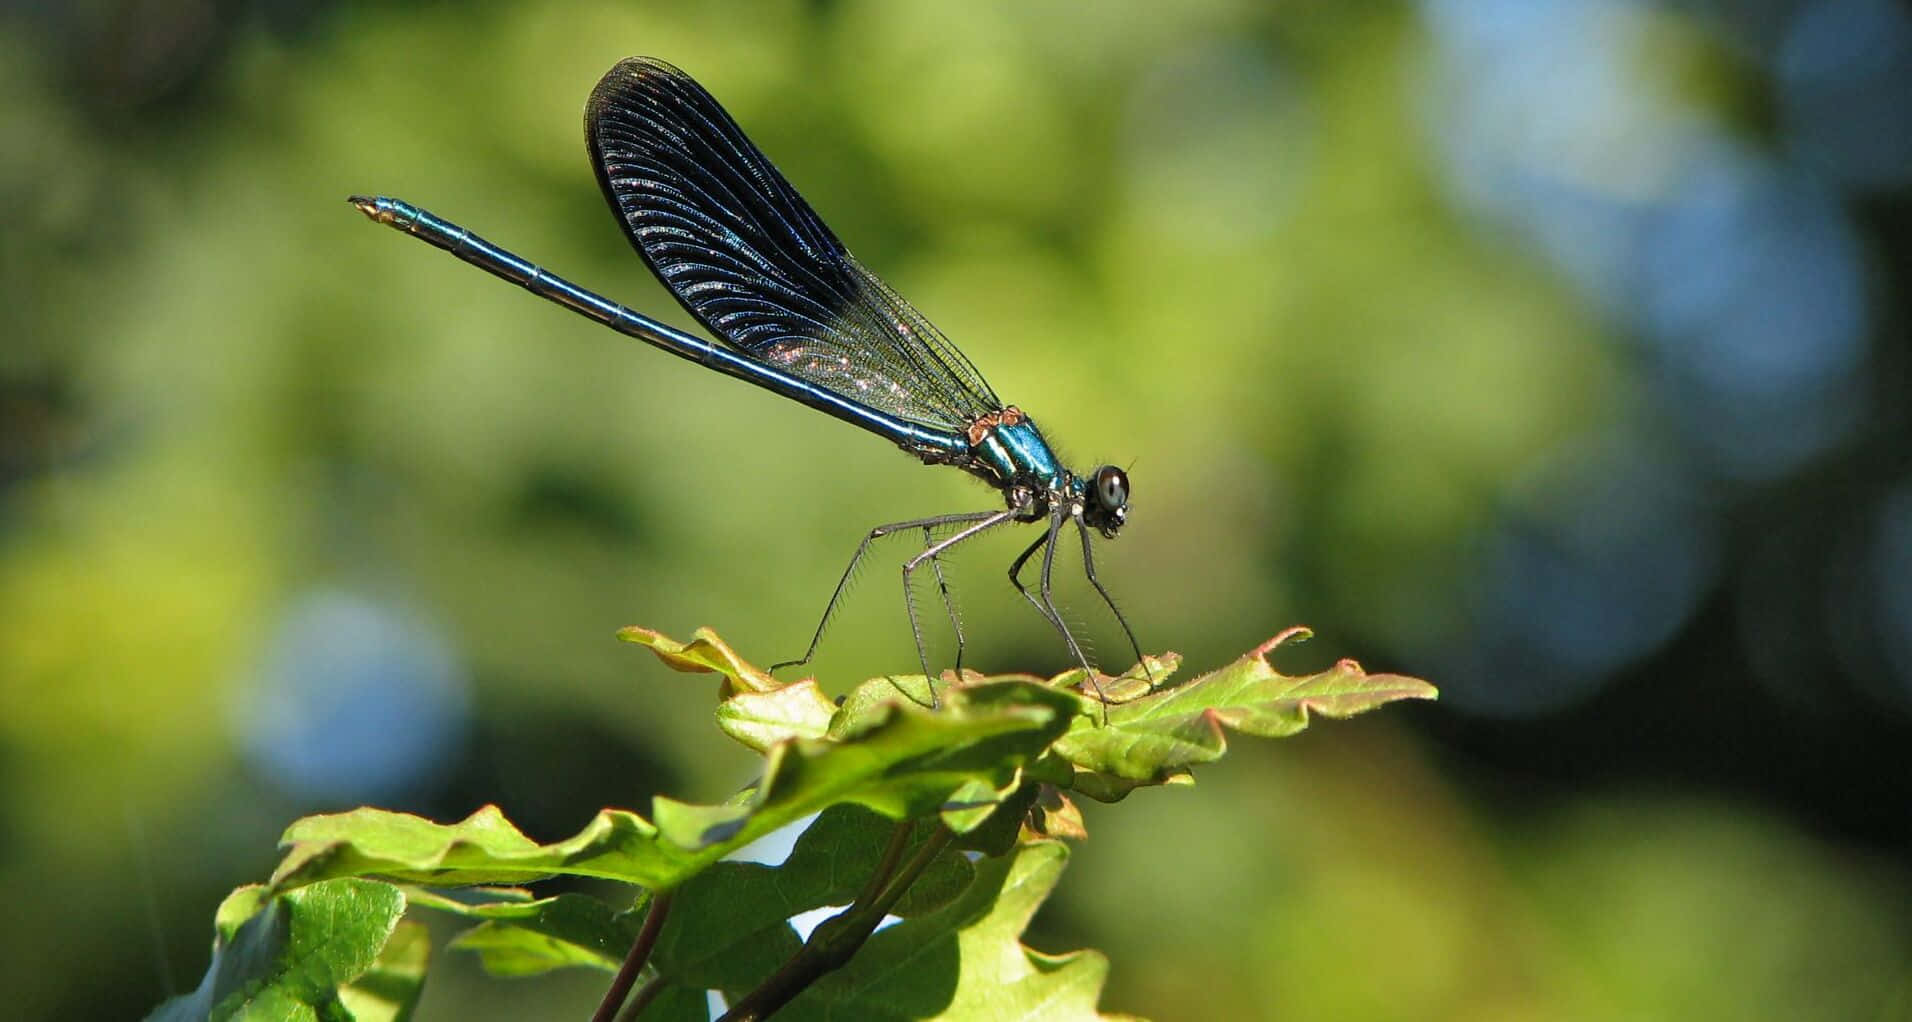 A vivid Dragonfly perched on a blade of grass